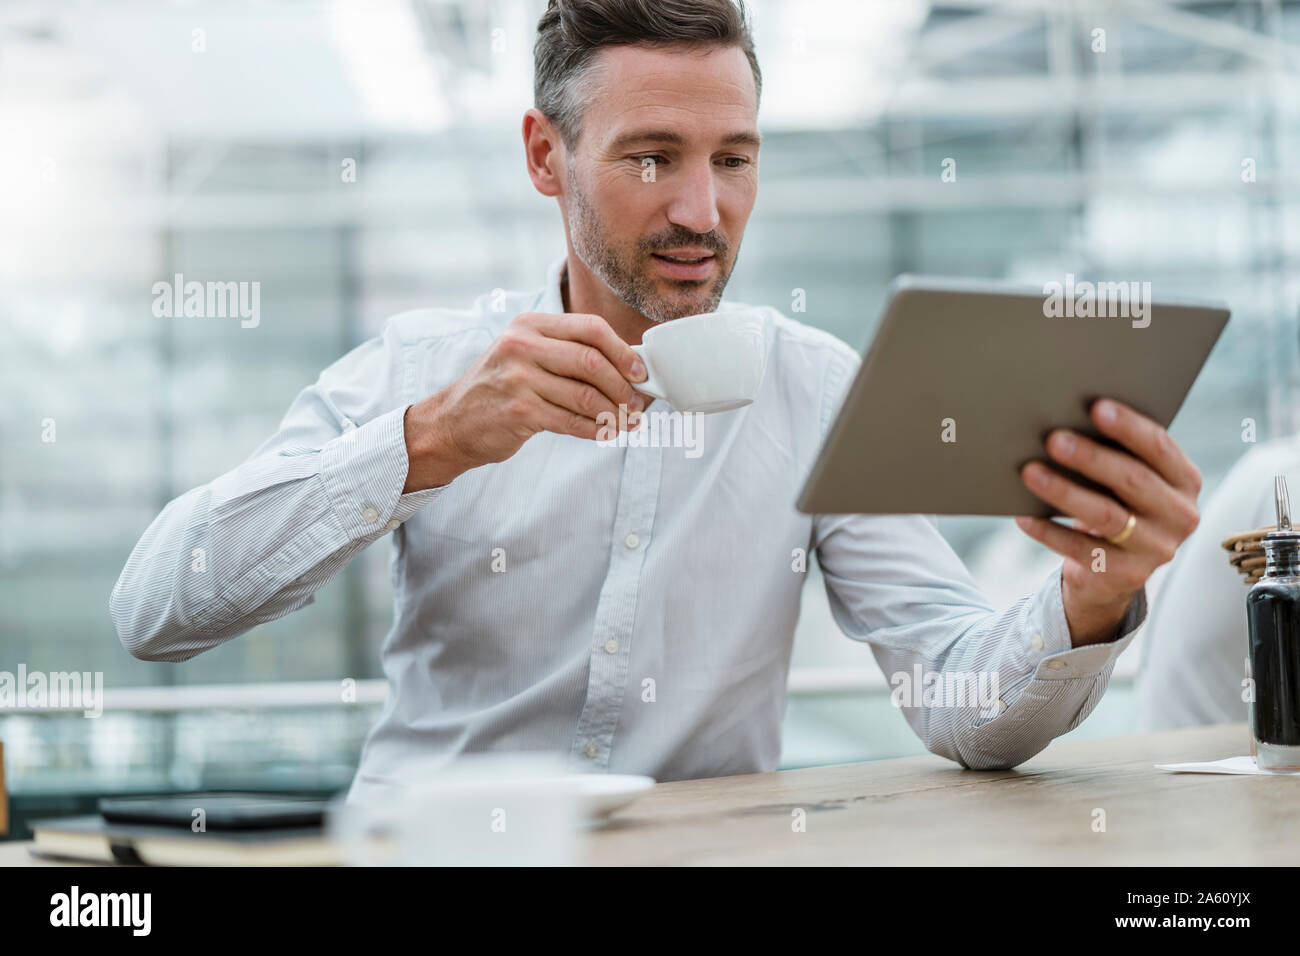 Businessman using tablet in a cafe Banque D'Images